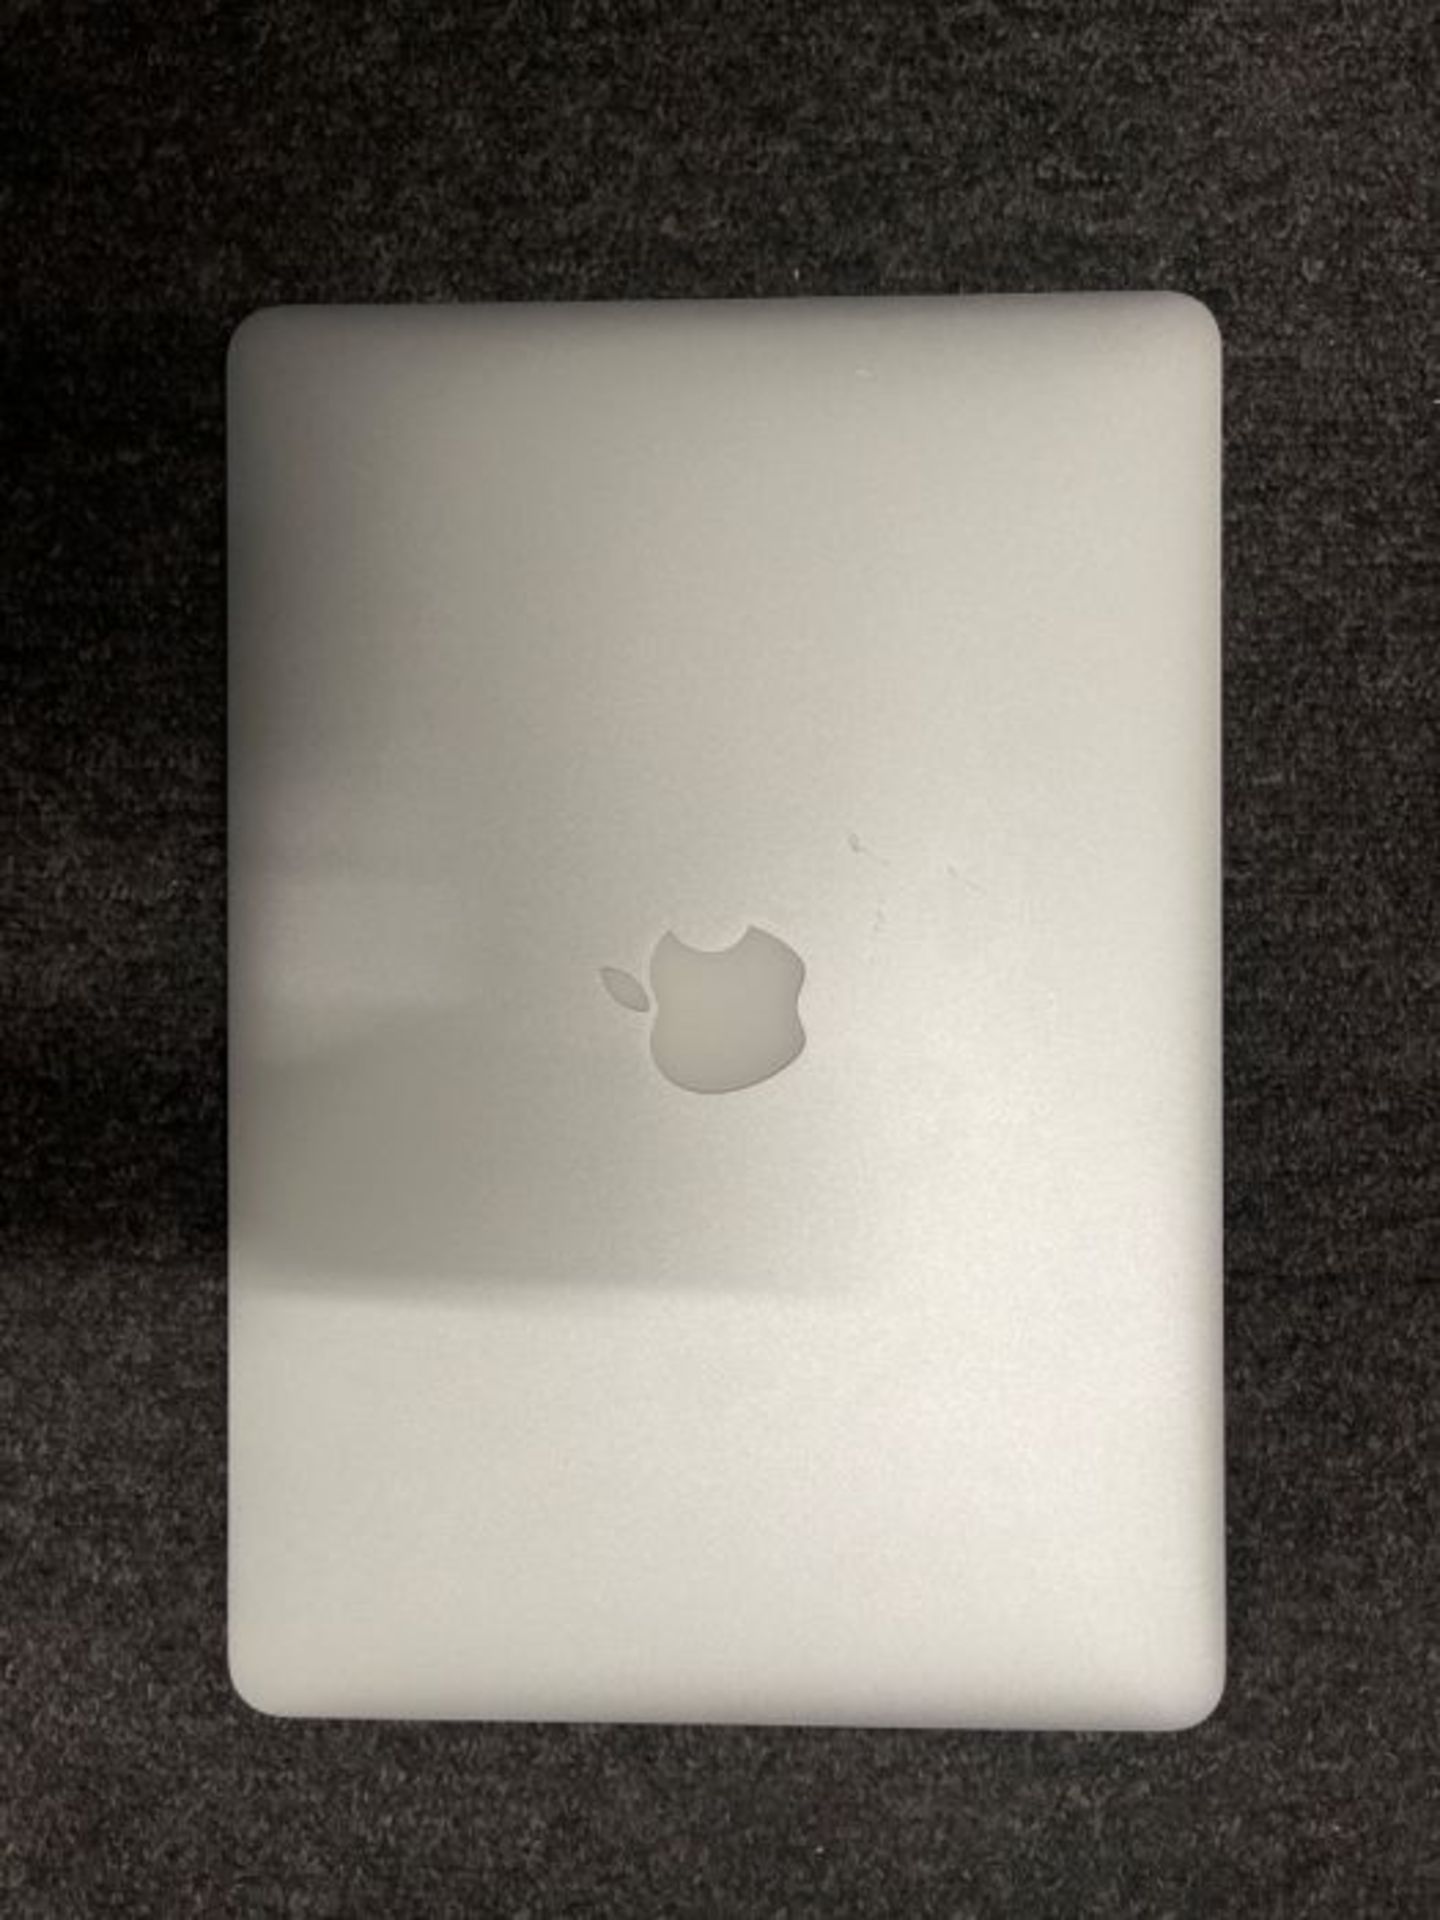 RRP £600.00 MacBook Air (13-inch, Early 2015) No Charger, in working order: Serial Number: C1MPFKM - Image 3 of 3